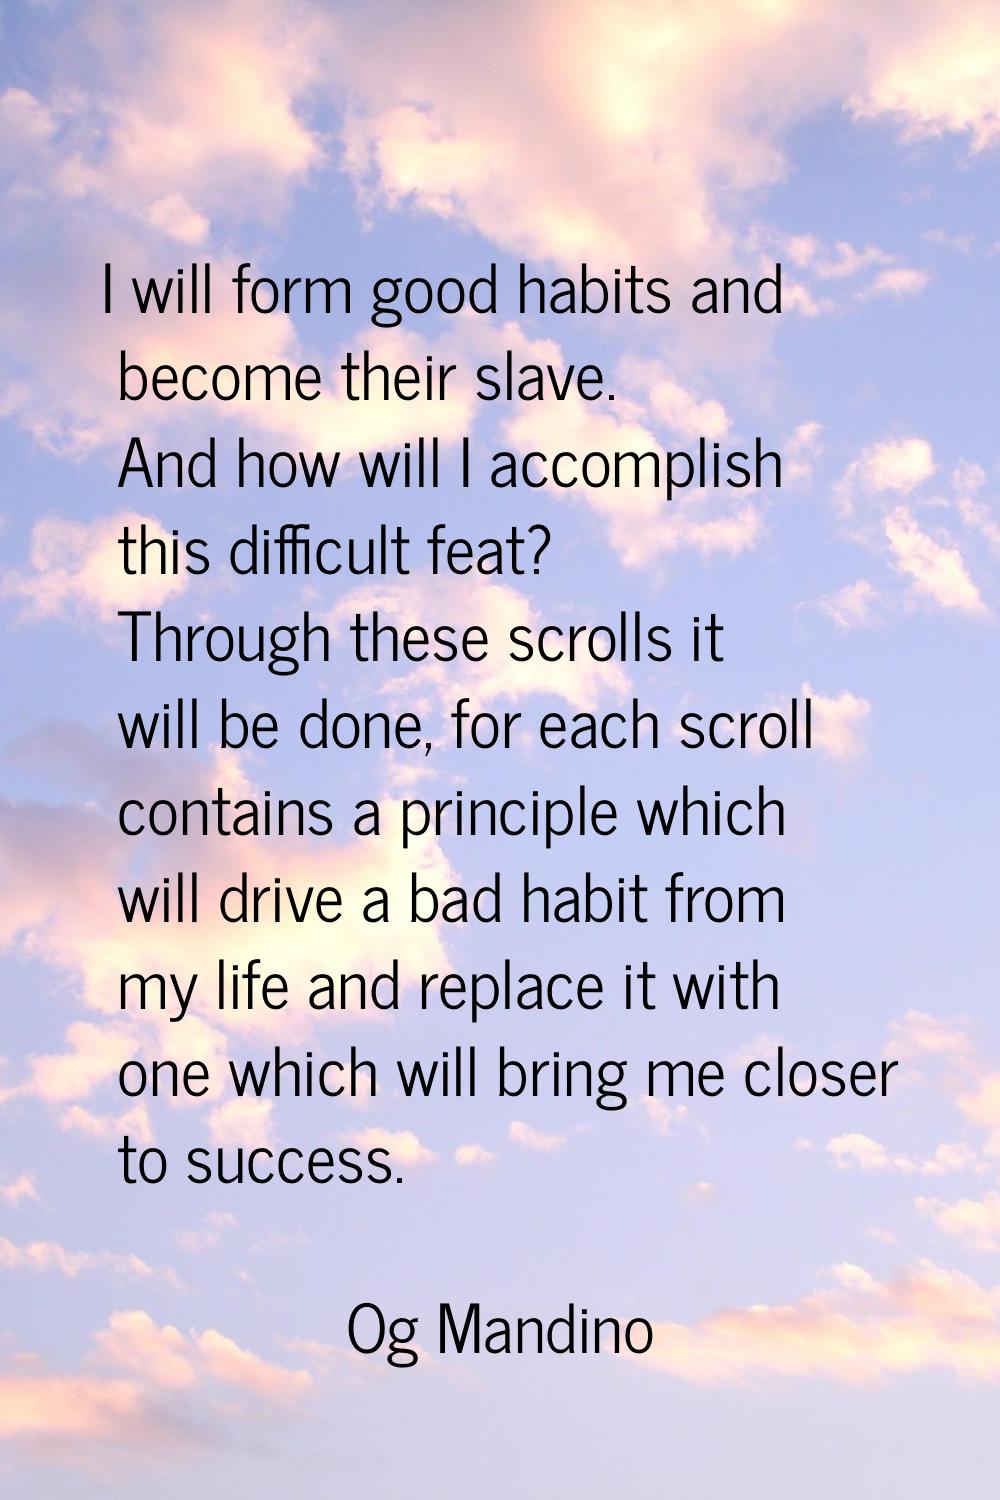 I will form good habits and become their slave. And how will I accomplish this difficult feat? Thro